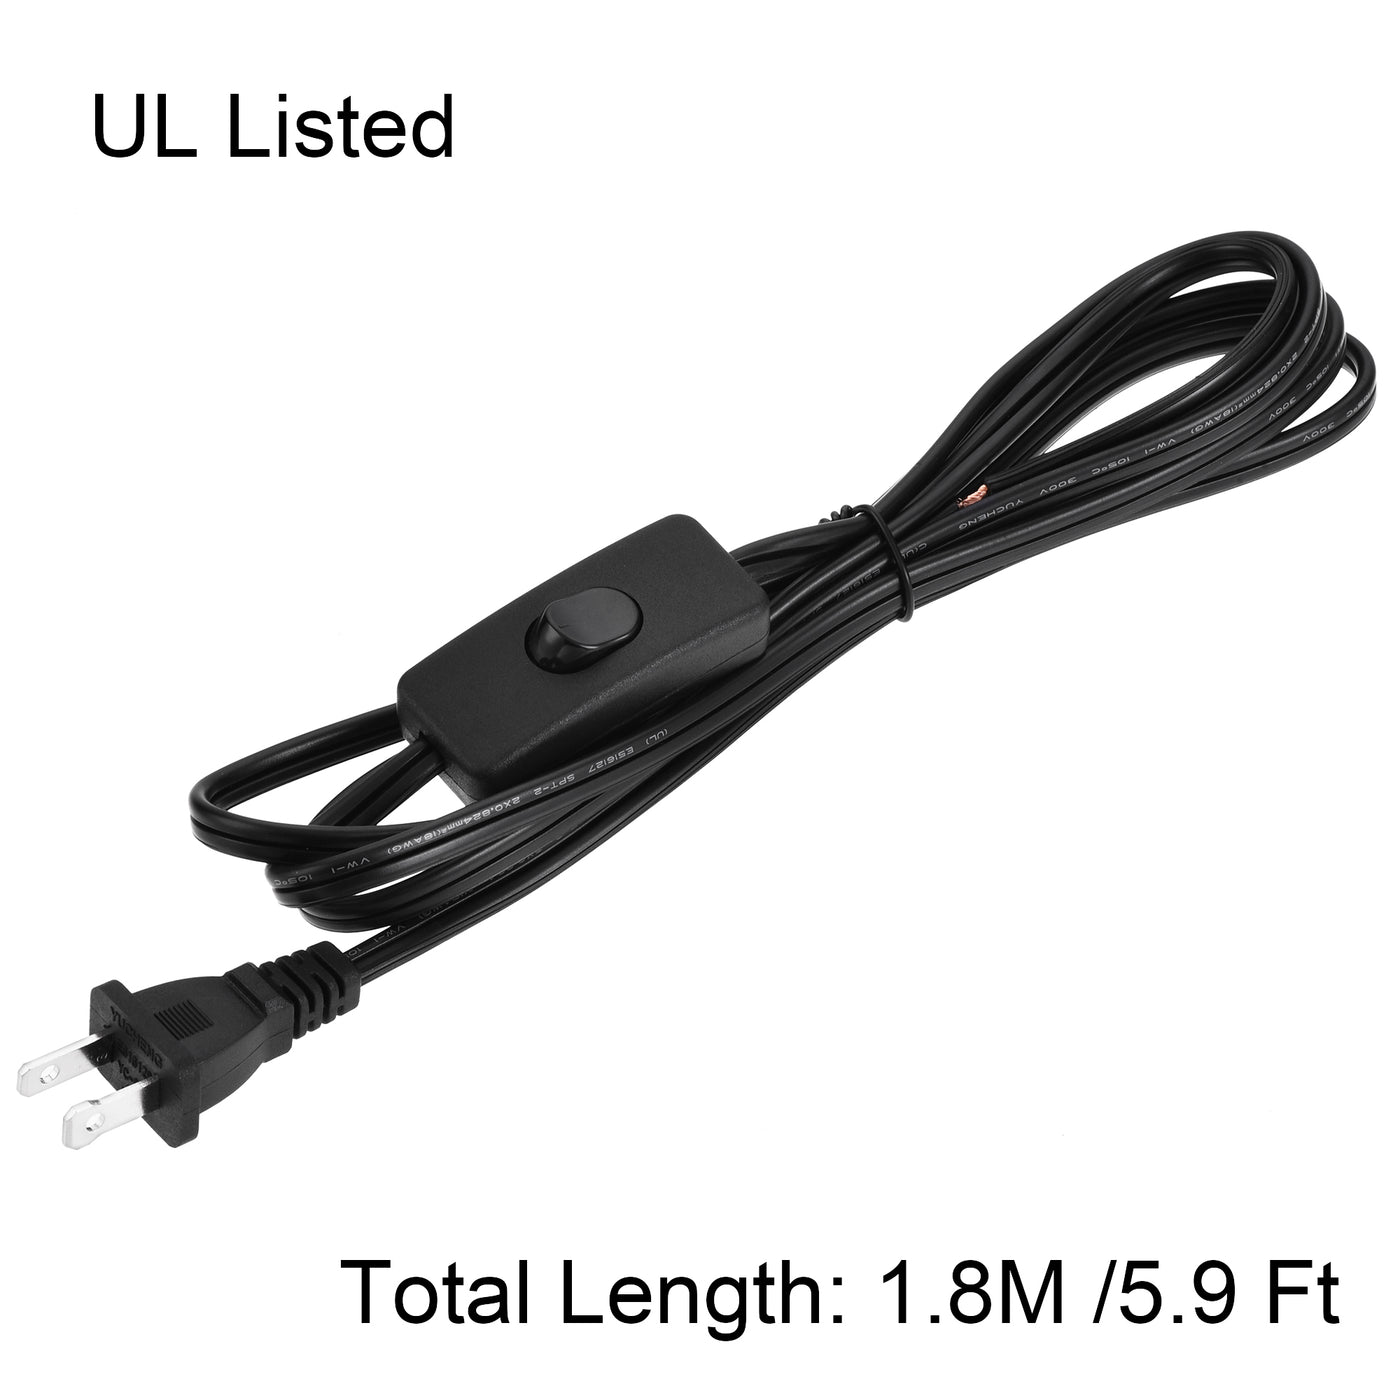 uxcell Uxcell US Plug Lamp Cord with Switch, SPT-2 18AWG Power Wire 1.8M Black, UL Listed